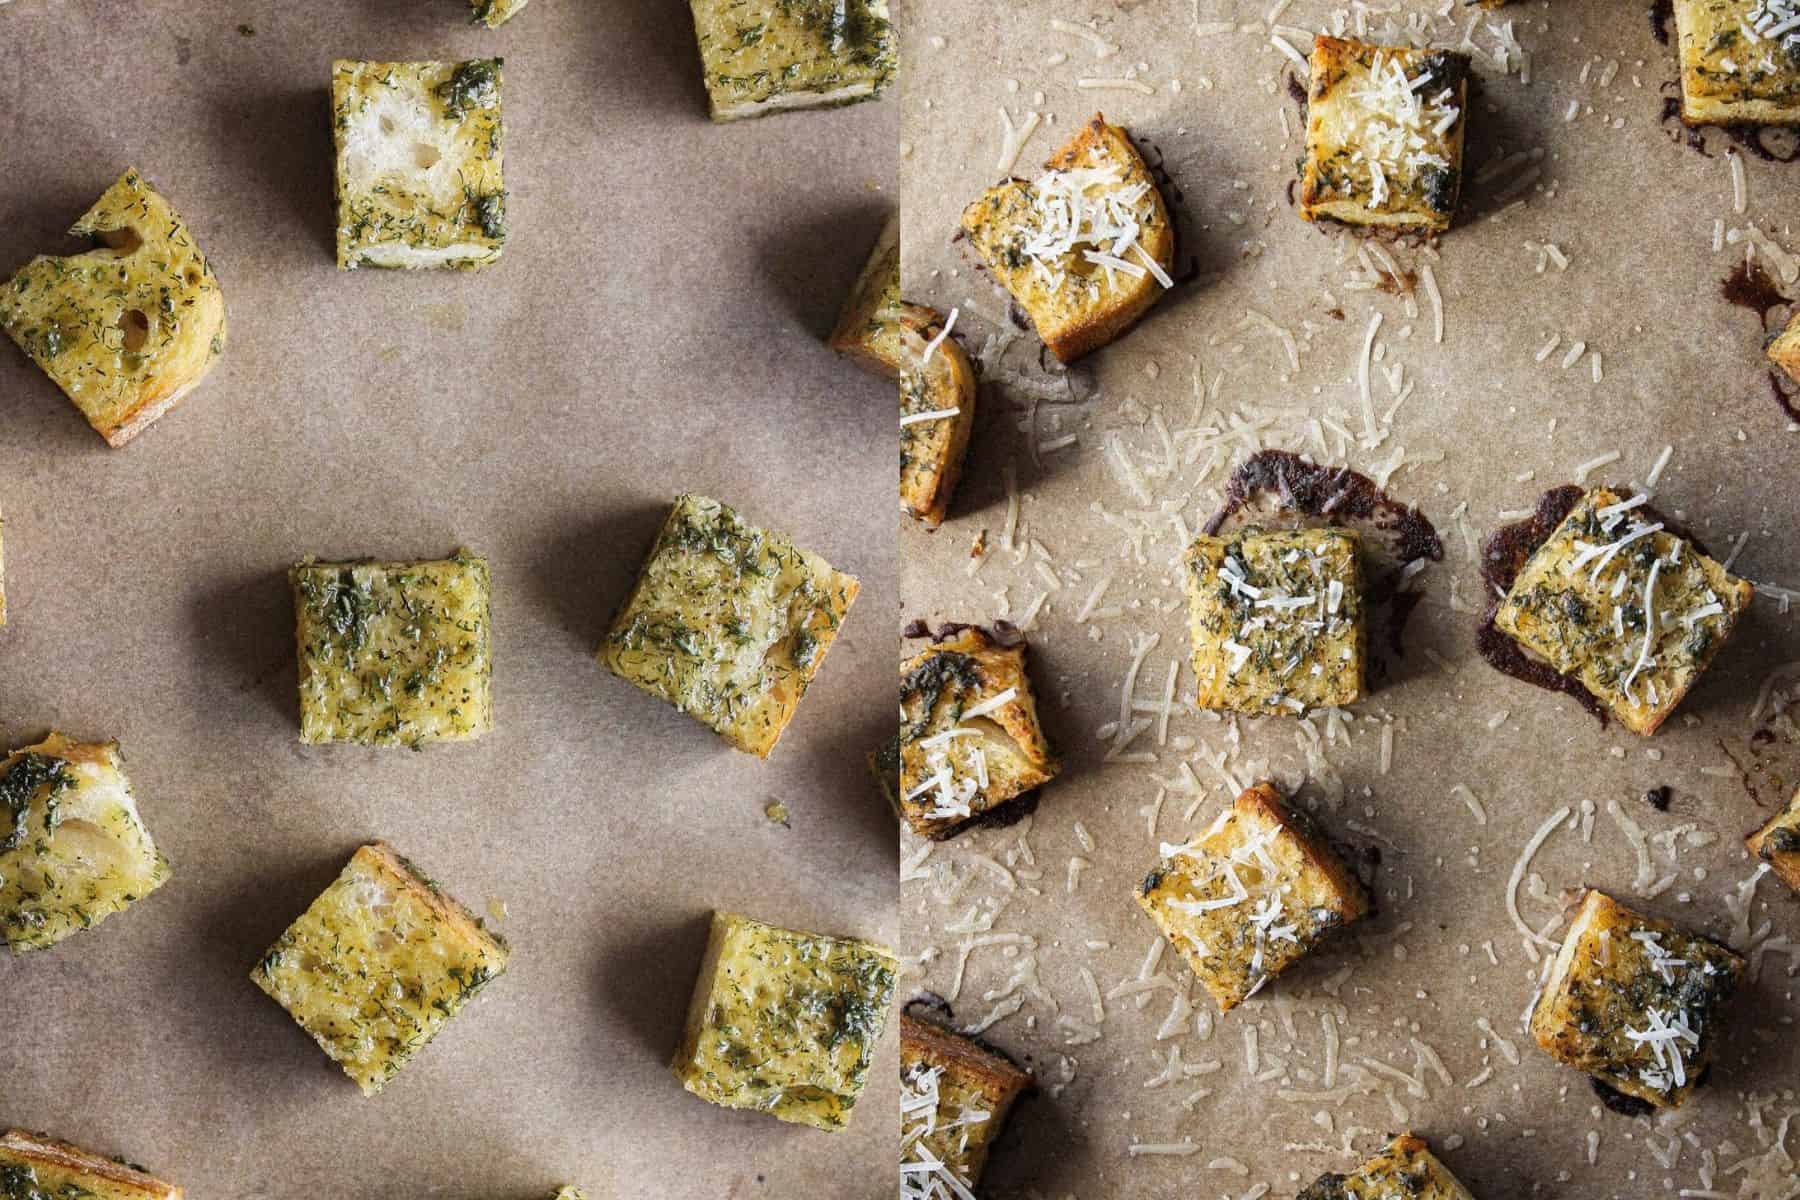 Croutons before and after baking.